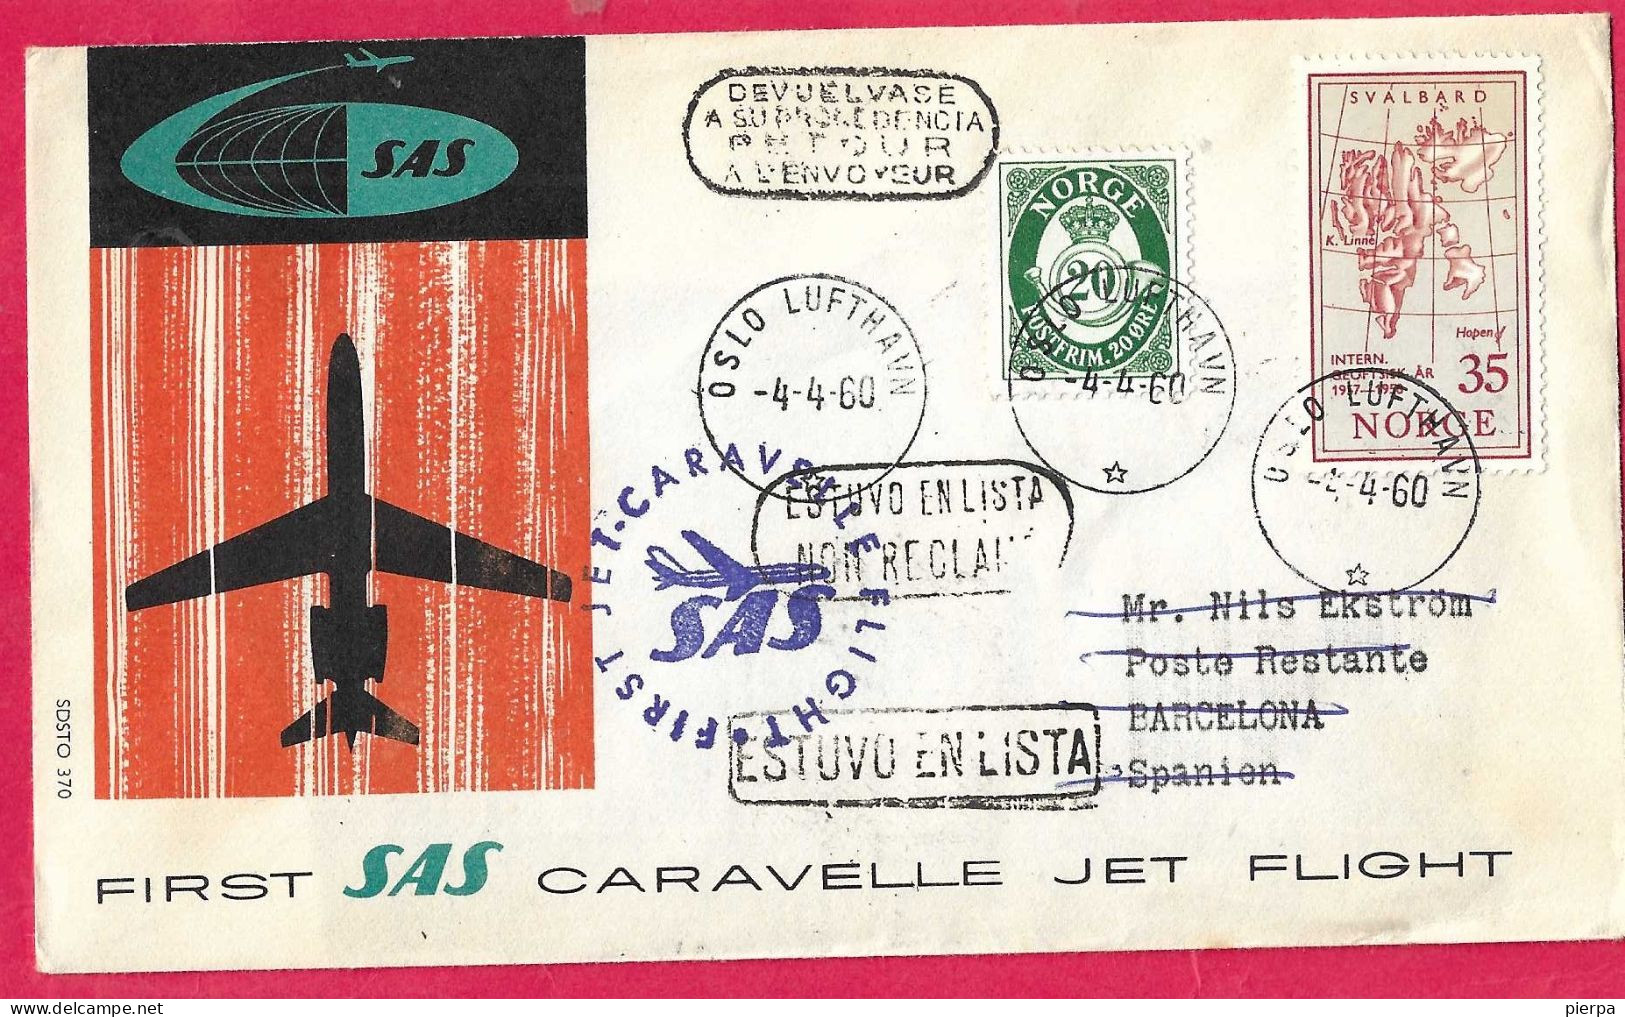 NORGE - FIRST CARAVELLE FLIGHT - SAS - FROM OSLO TO BARCELONA *4.4.60* ON OFFICIAL COVER - Briefe U. Dokumente